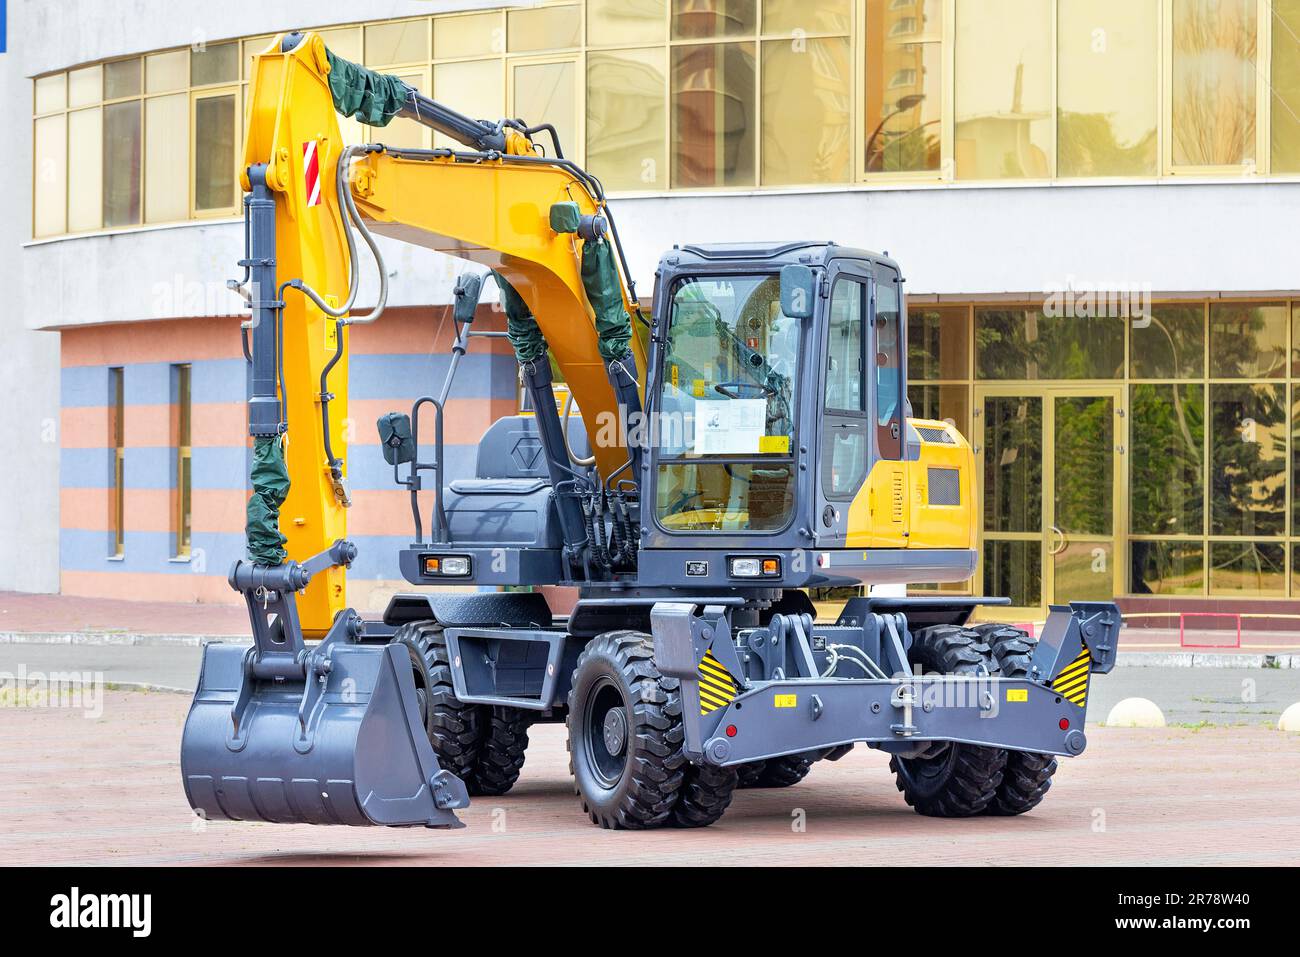 New wheeled construction excavator against the backdrop of a building on a sunny day. Stock Photo